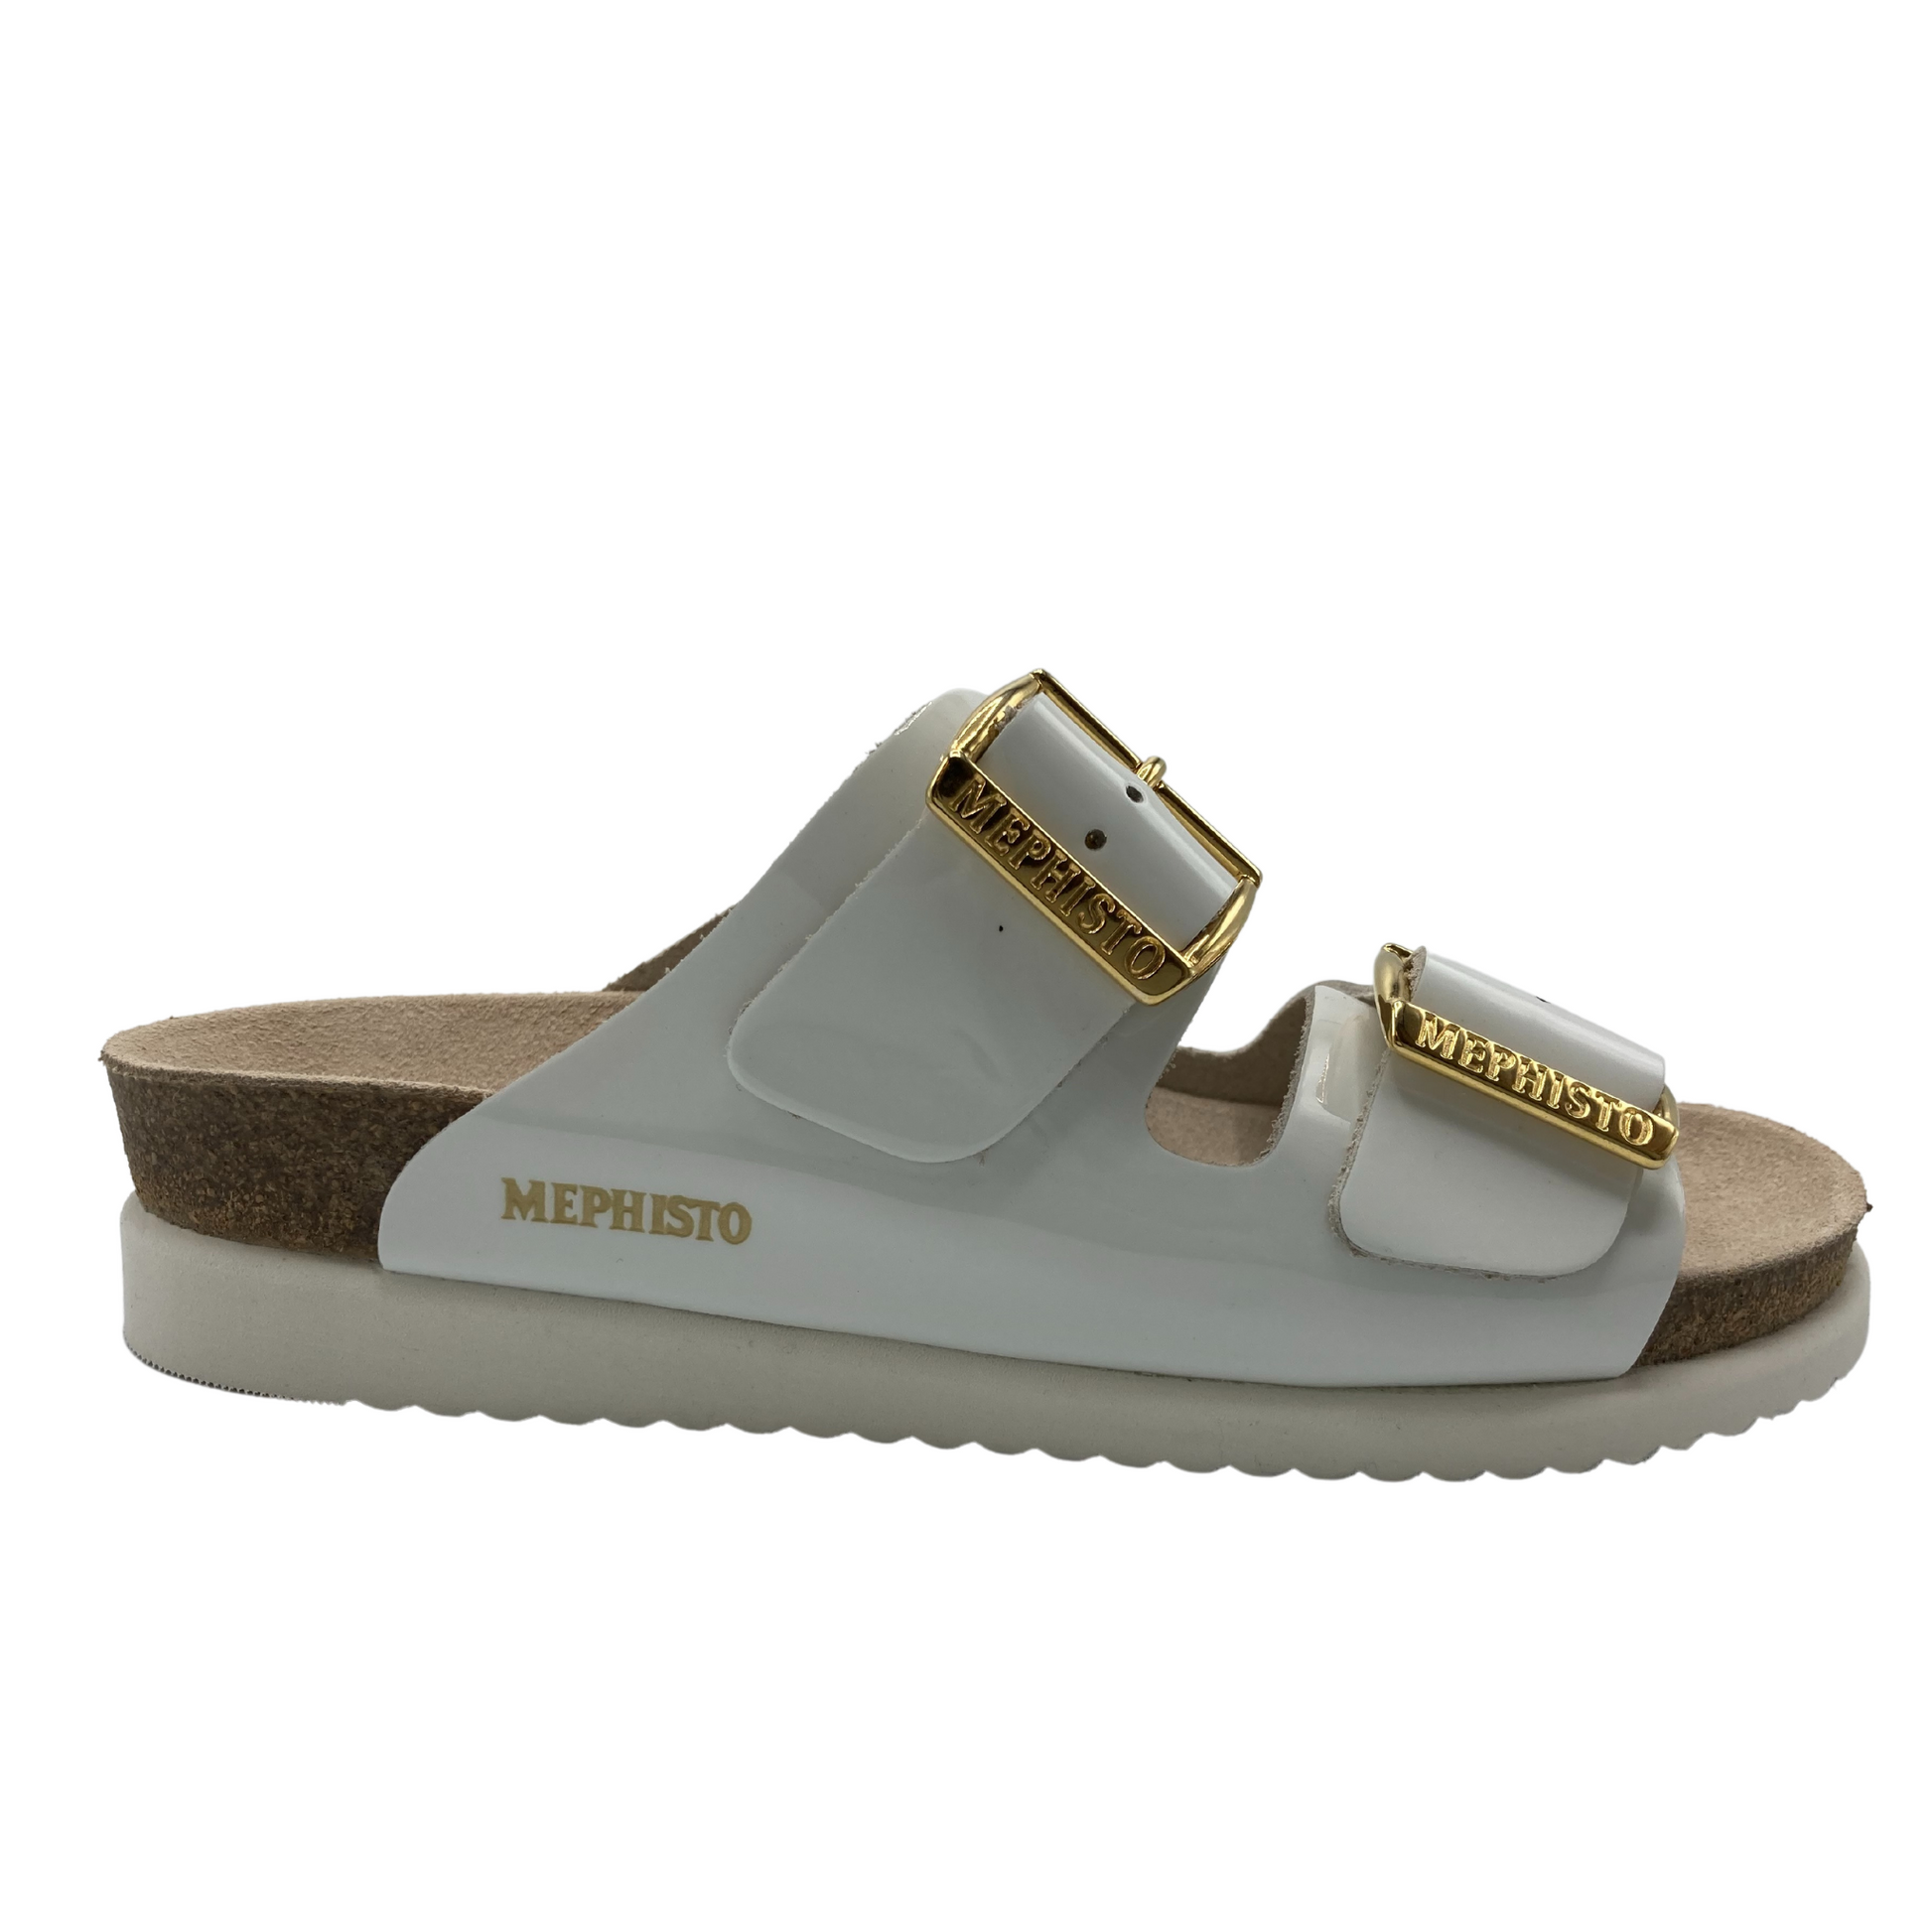 Side view of the right sandal. White patent leather with gold Mephisto written on the side. Embossed Mephisto on the gold buckles.